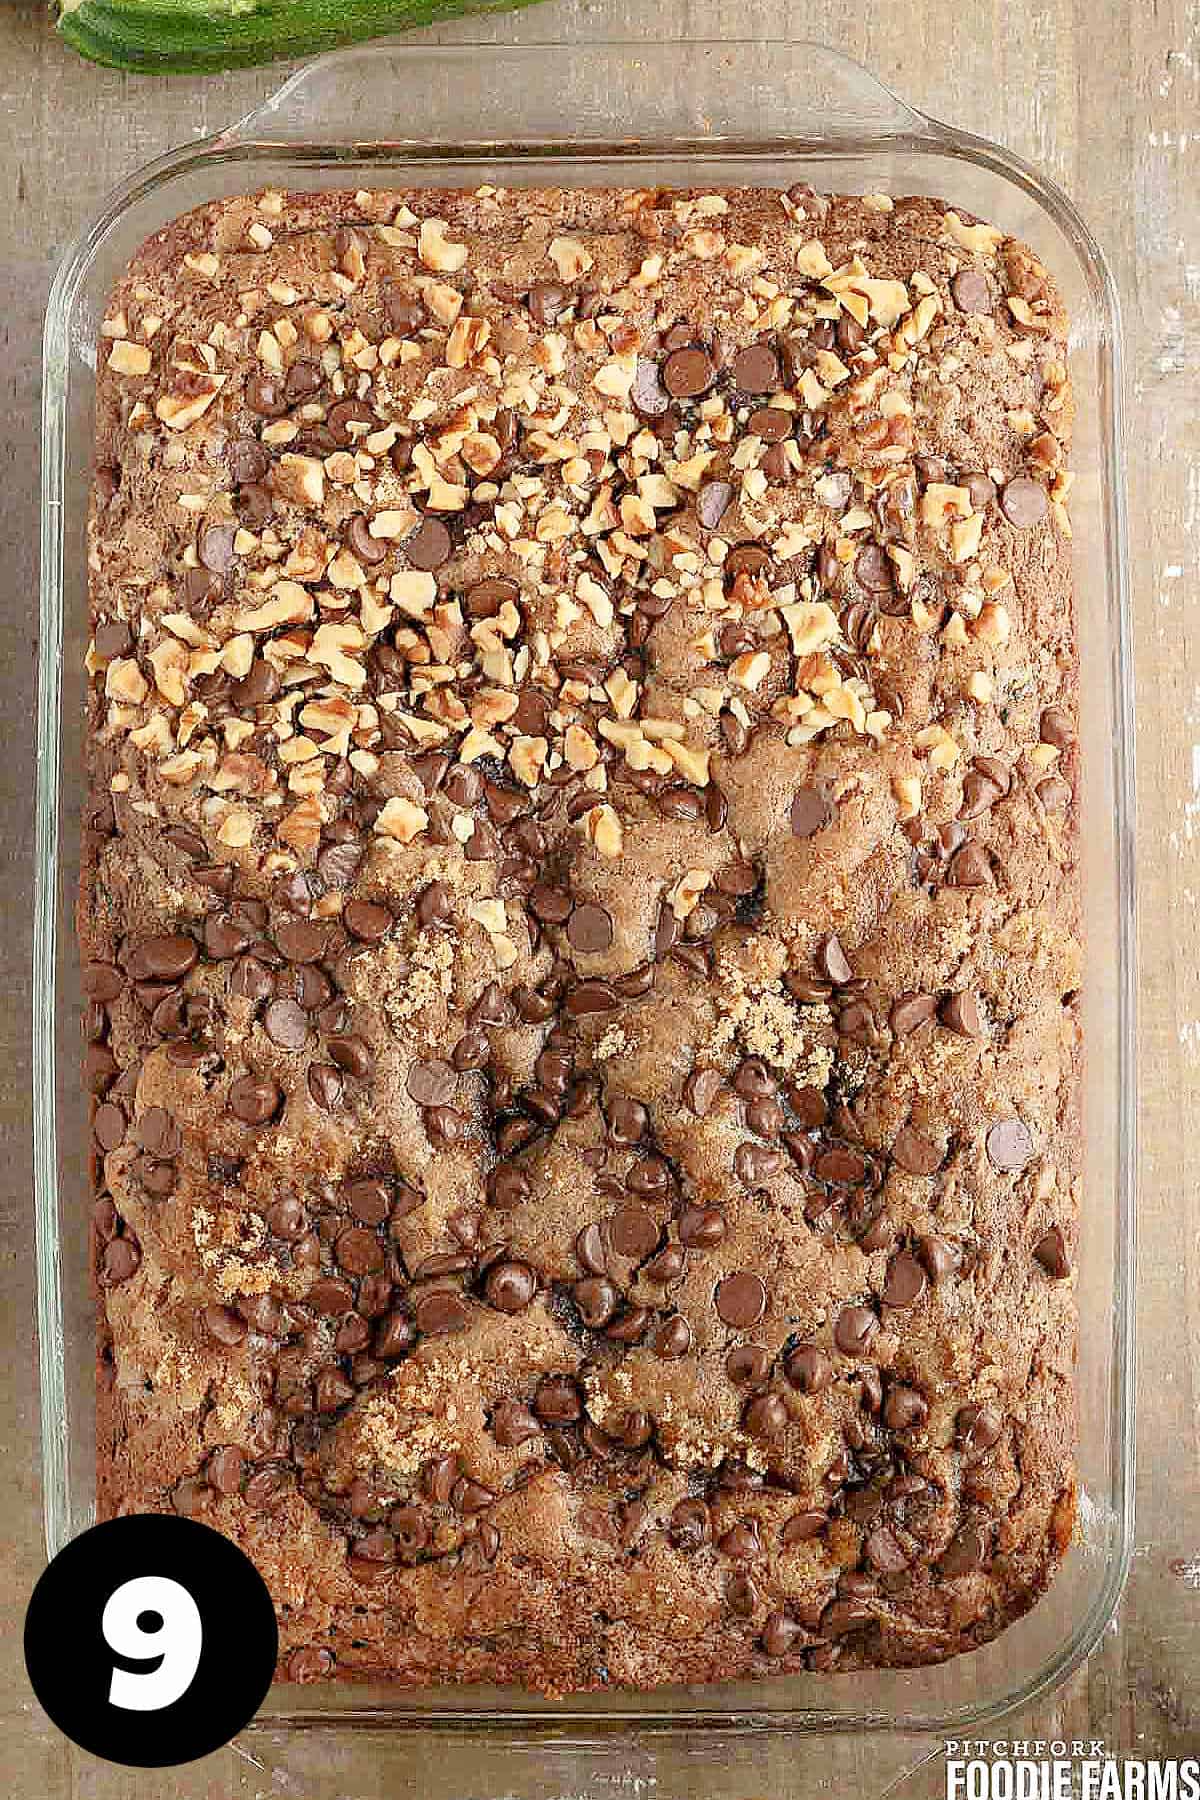 A baked chocolate cake with walnuts and chocolate chips on top.